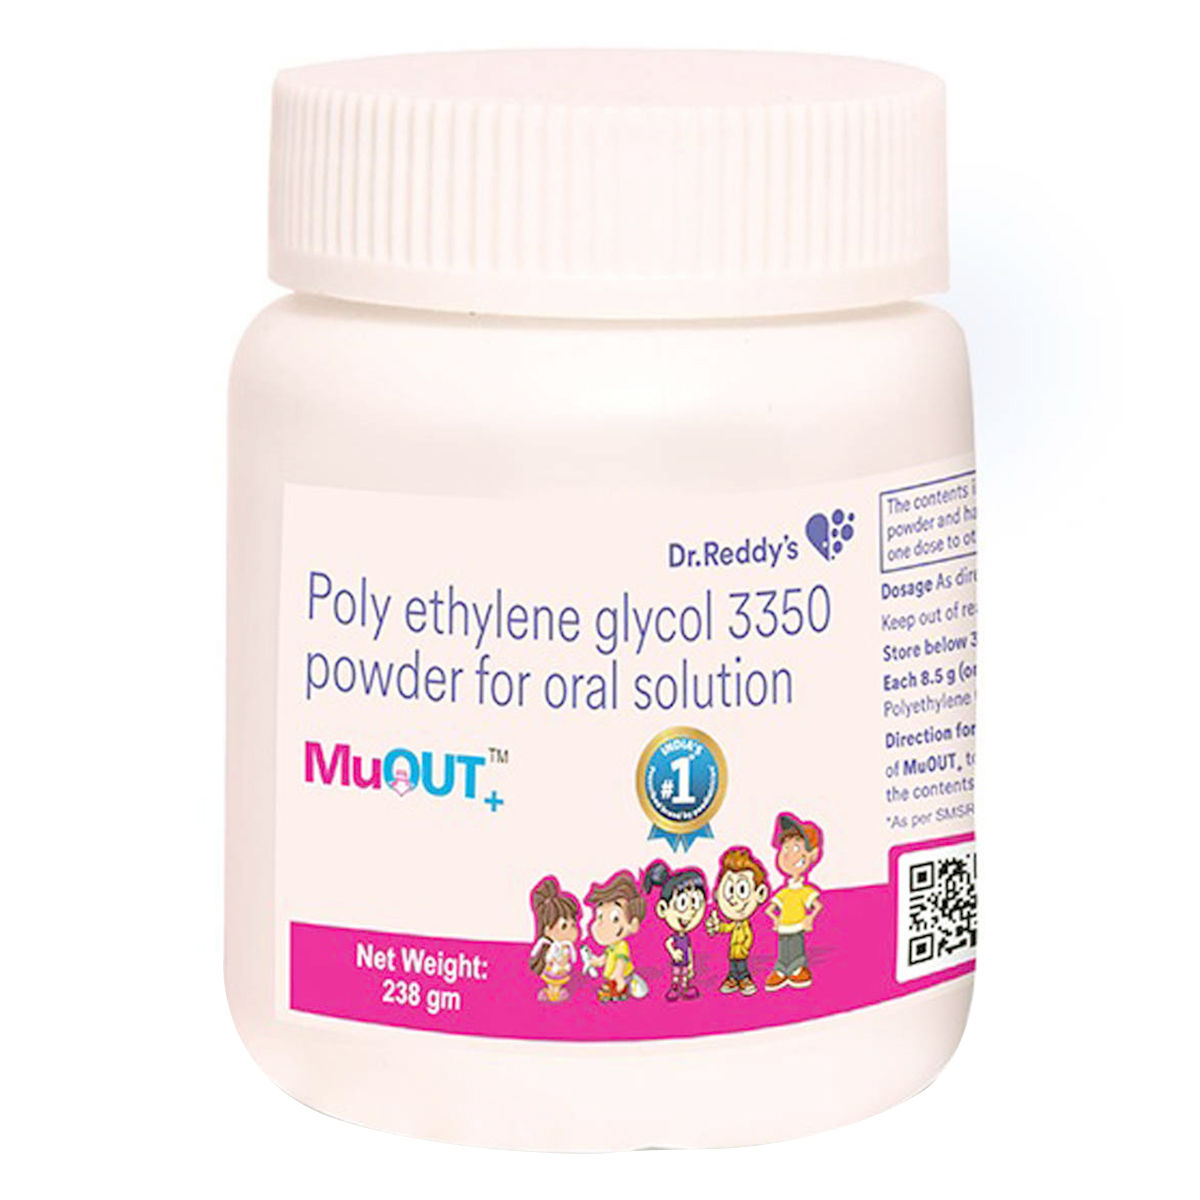 Buy Muout Plus Powder For Oral Solution 238 gm Online